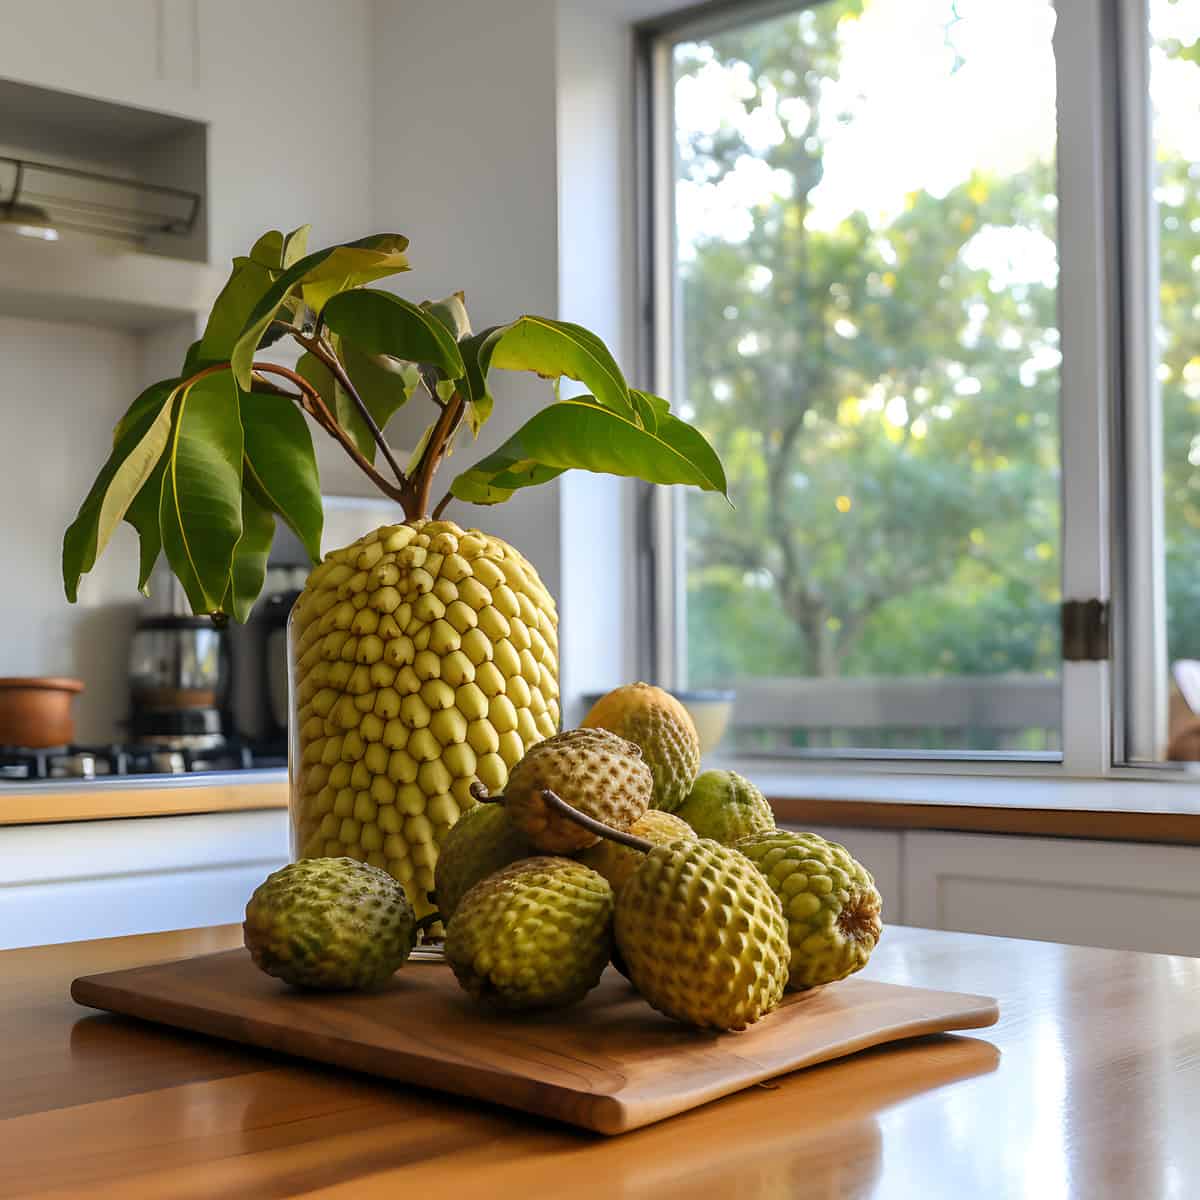 Annona Stenophylla on a kitchen counter